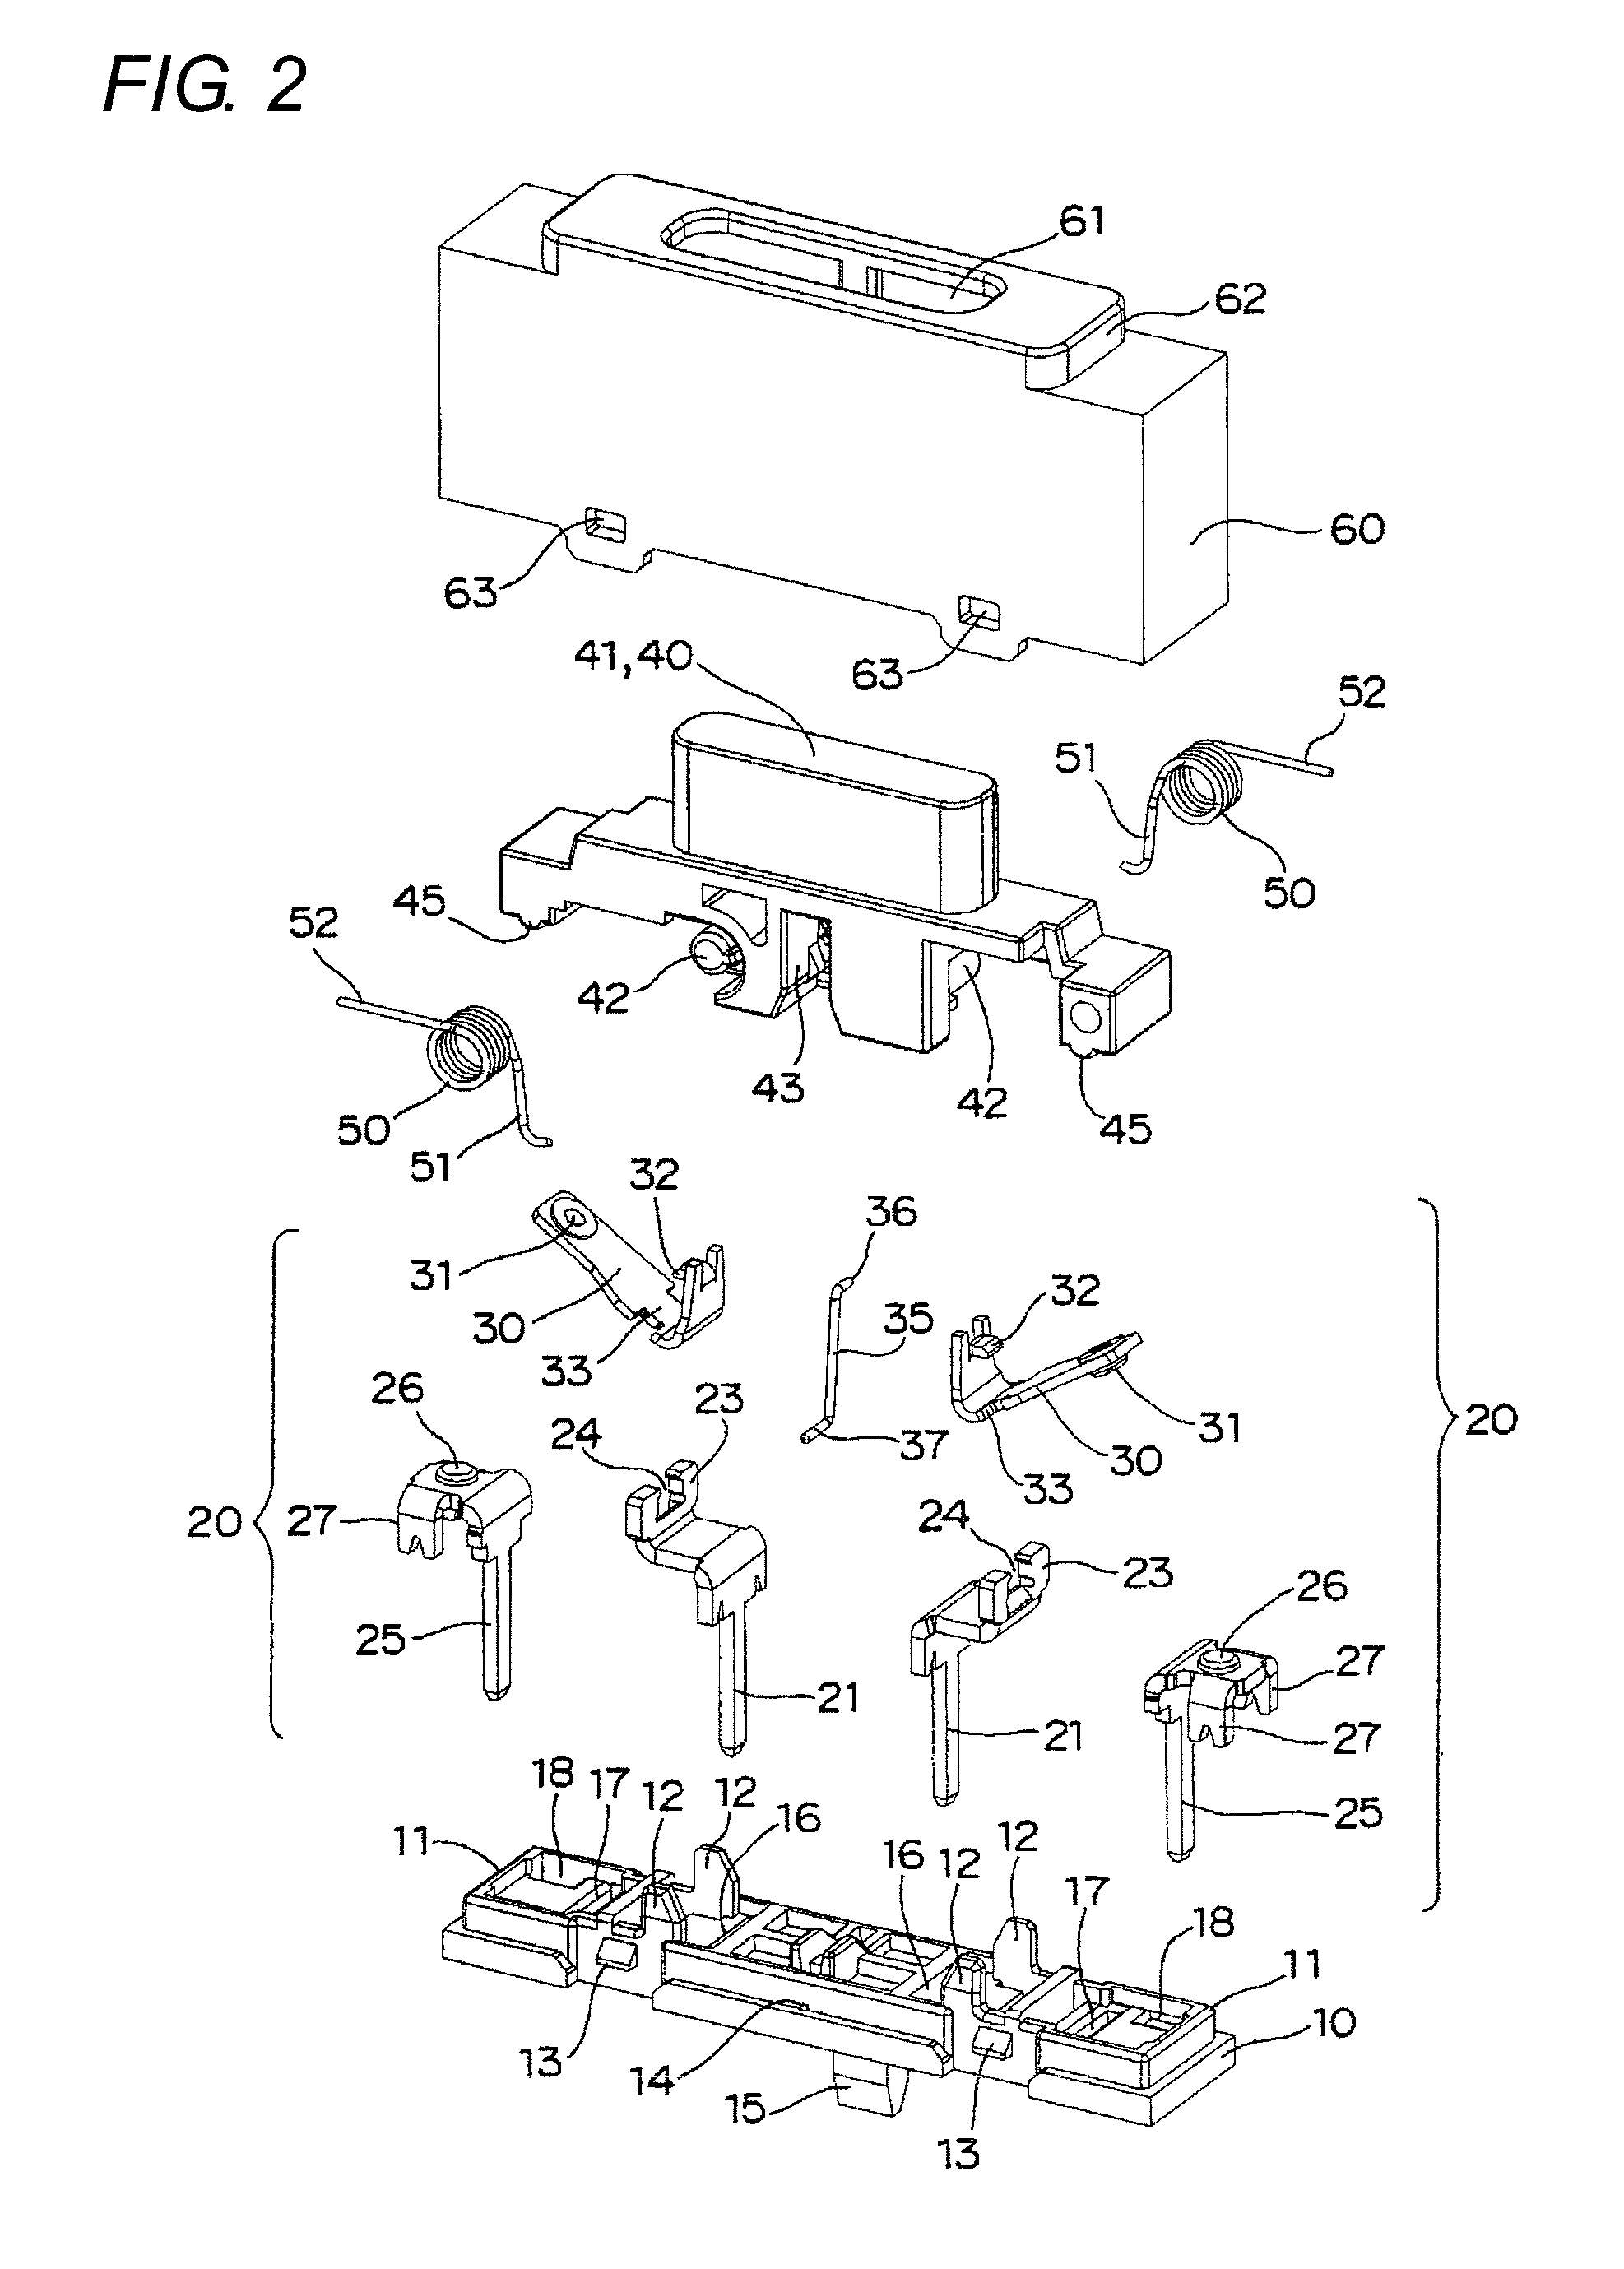 Switch having a plunger, a support terminal, and a coil spring